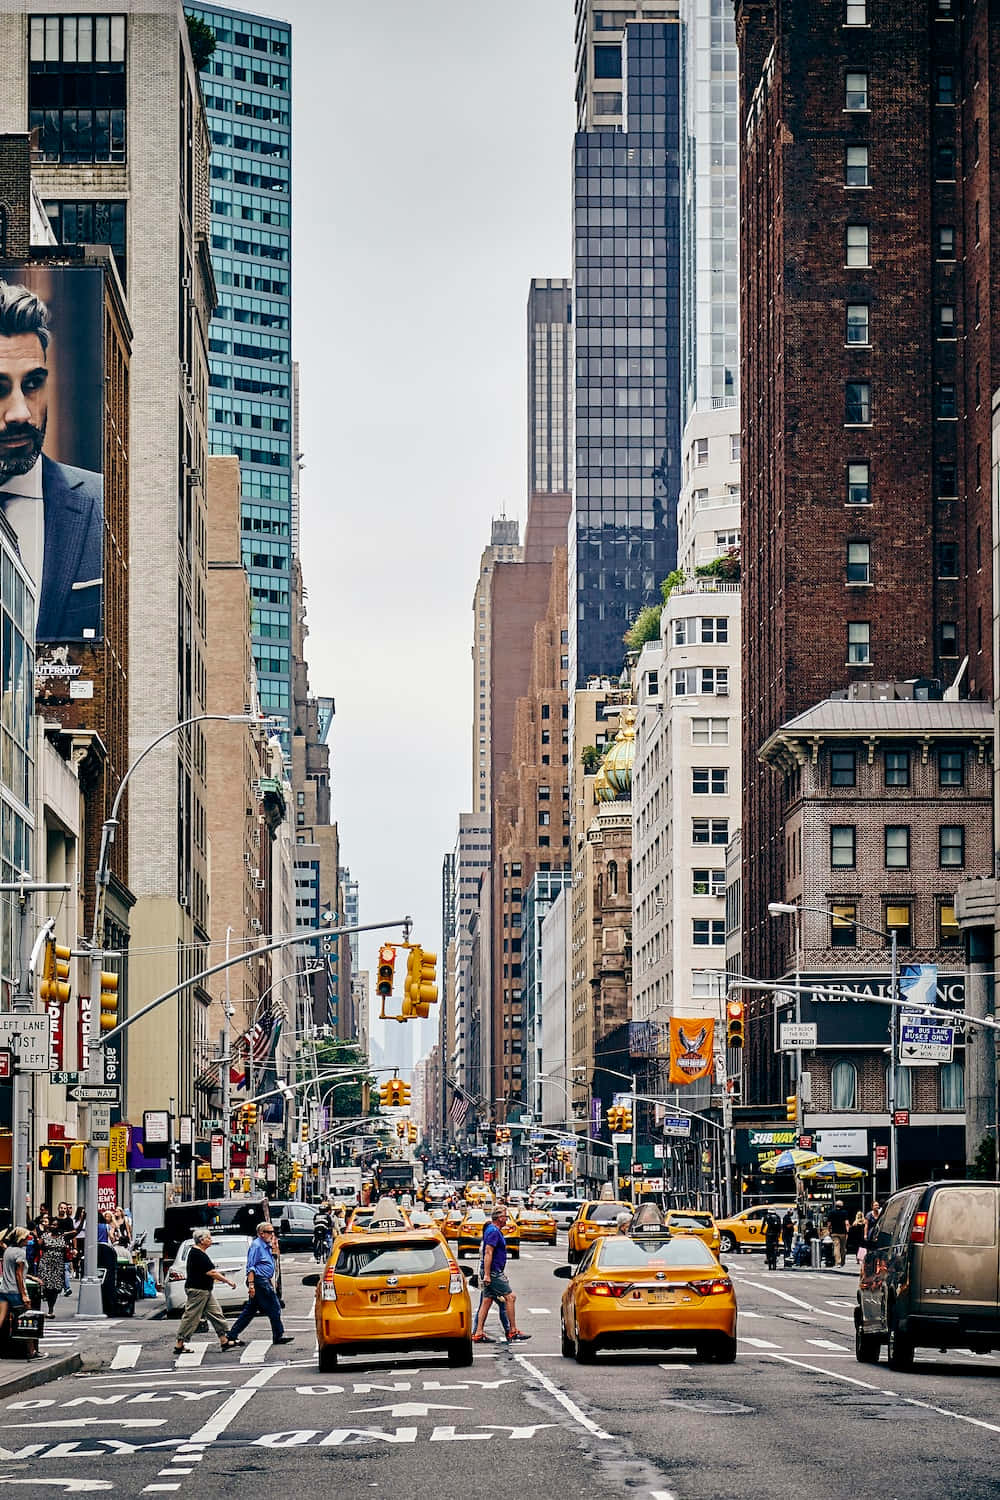 Take in the beauty of the city with Android's New York